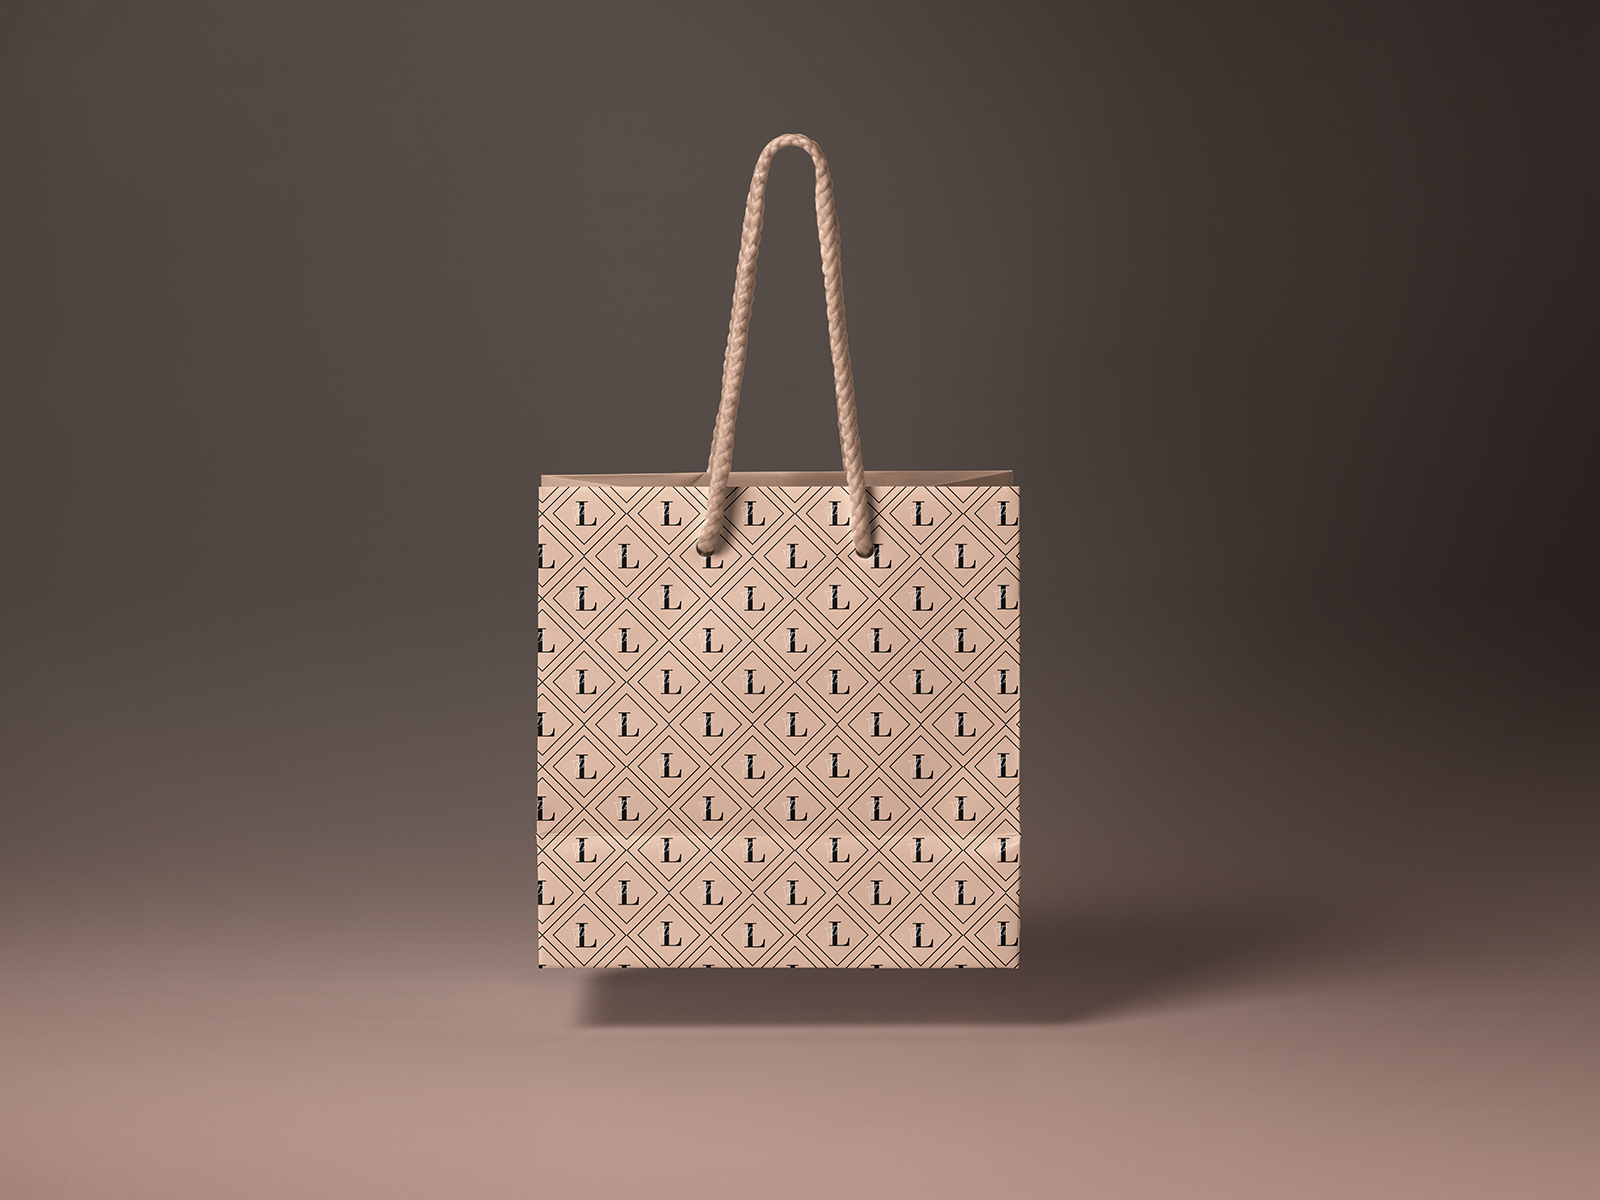 The Luxaholic Shopping Bag by Rita Saaidi on Dribbble